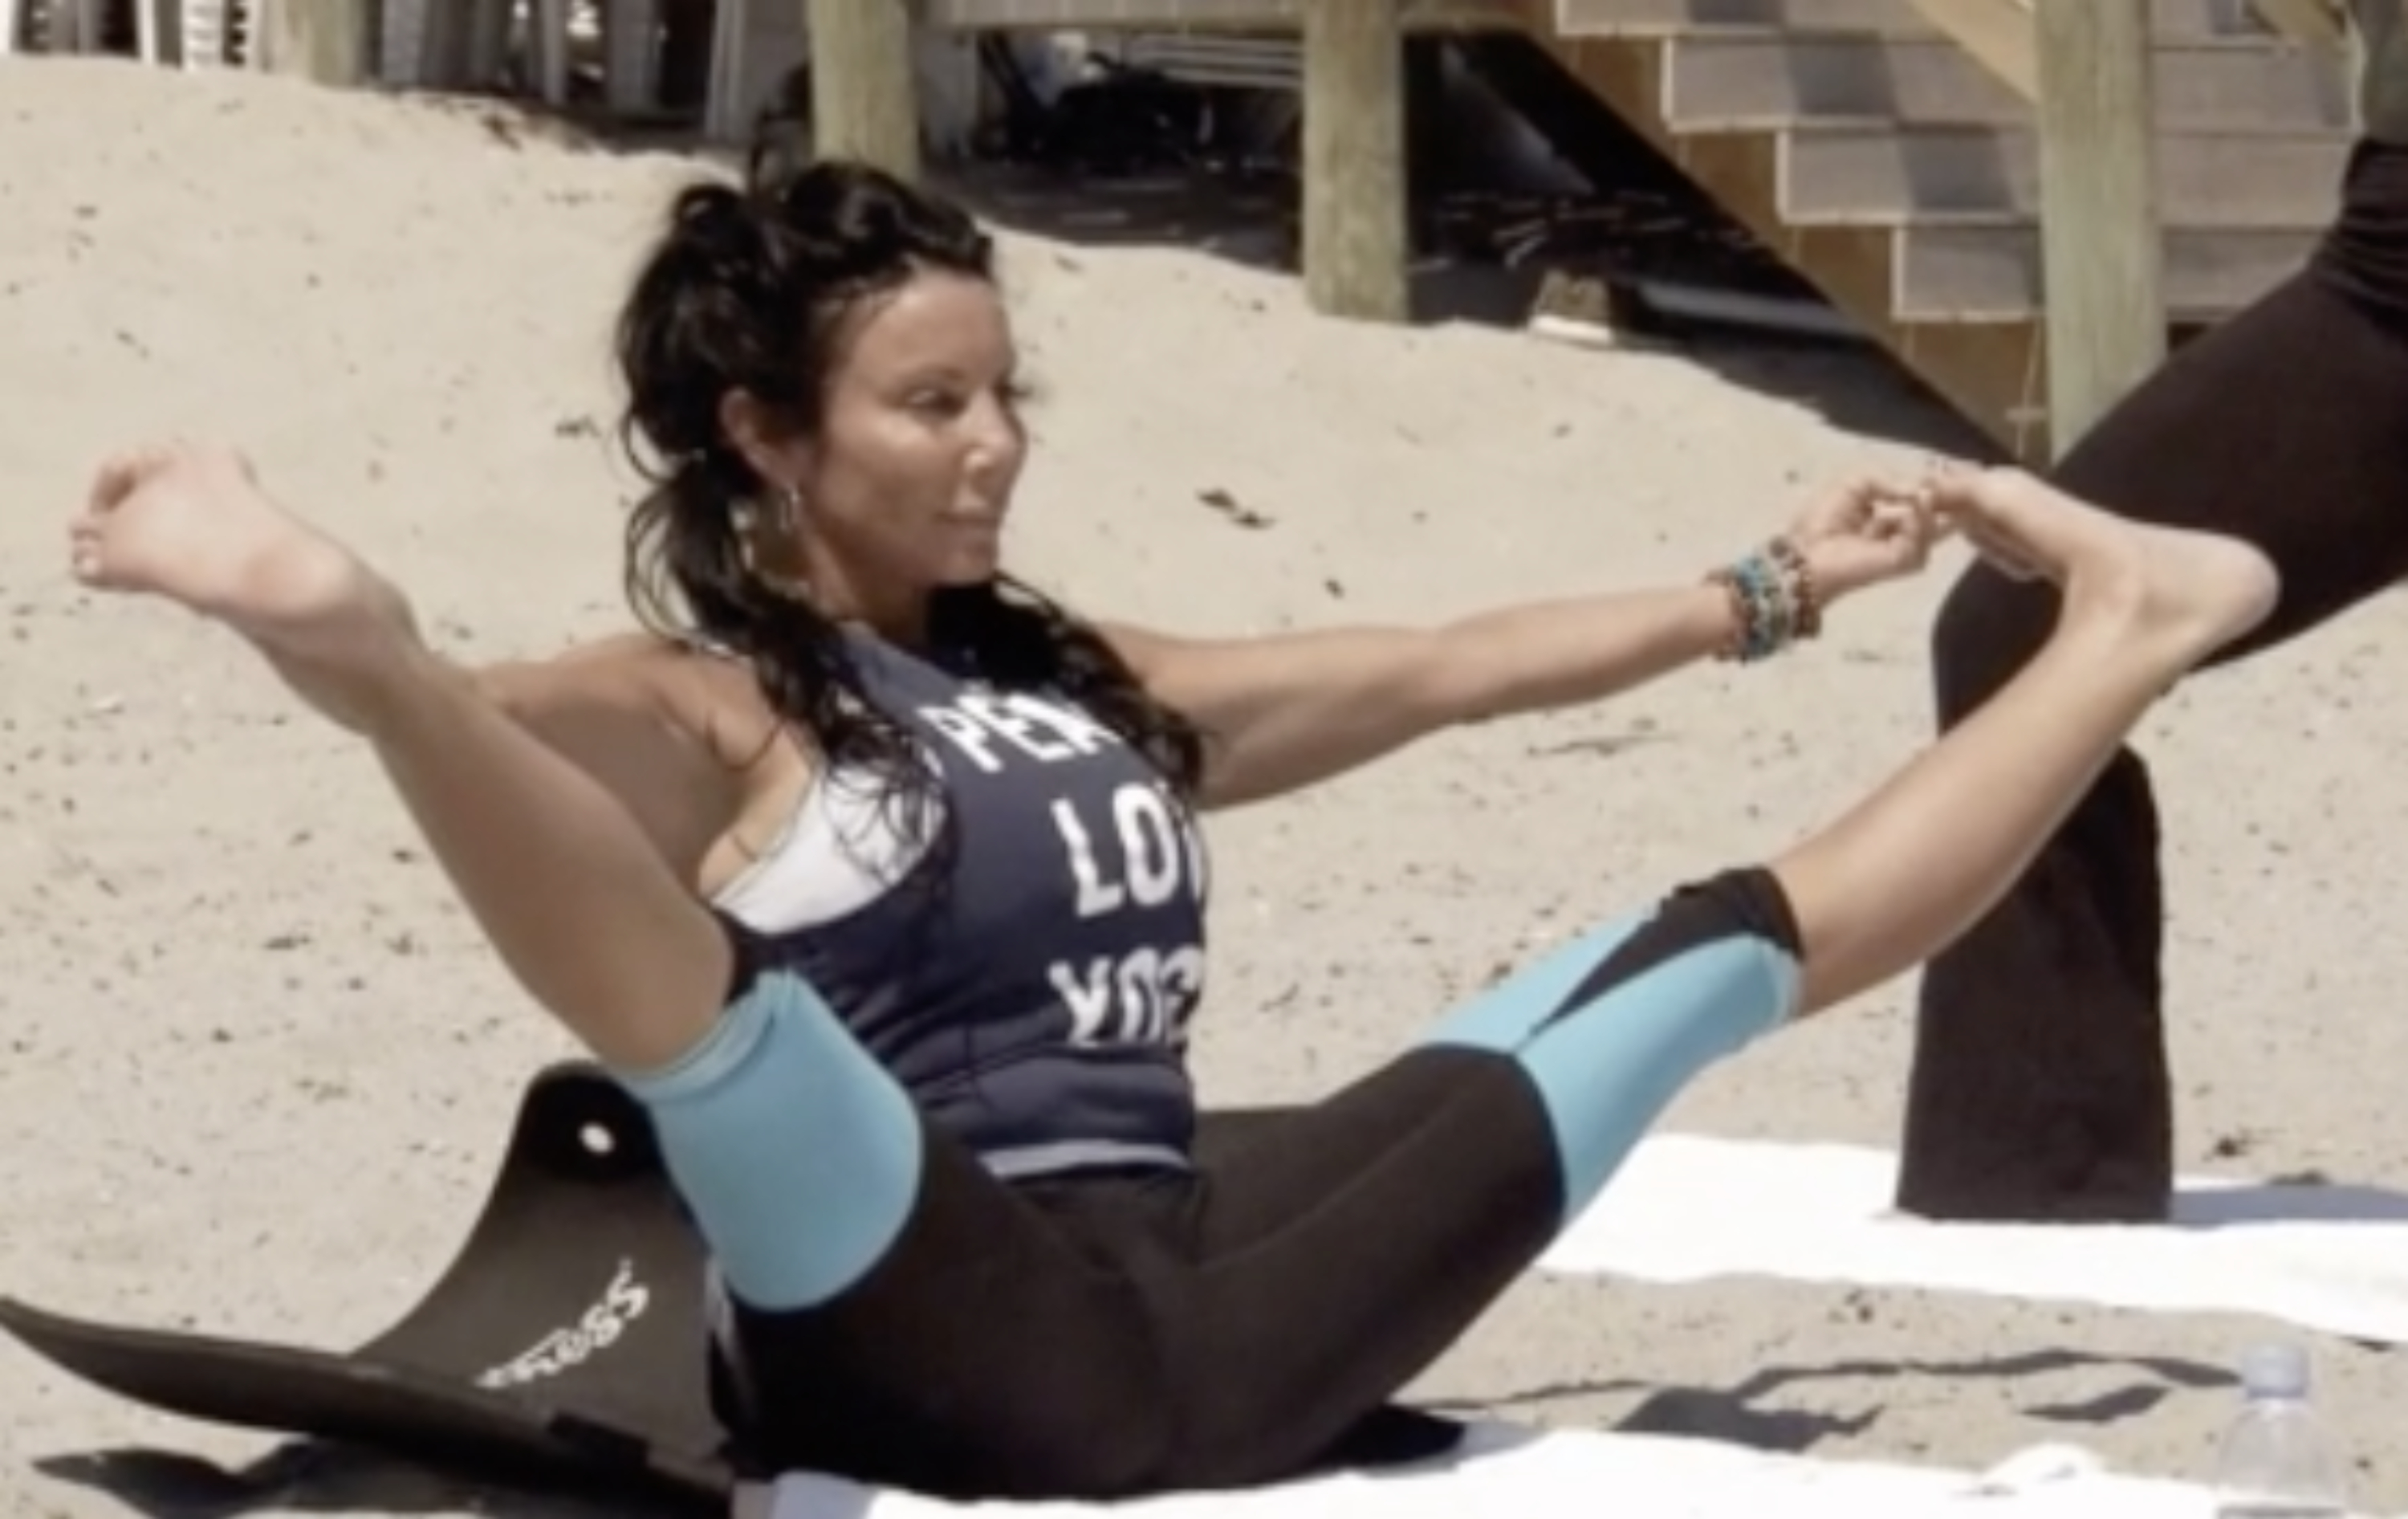 A person performs a yoga pose on the sand, holding their feet, wearing a graphic tank top and two-toned leggings